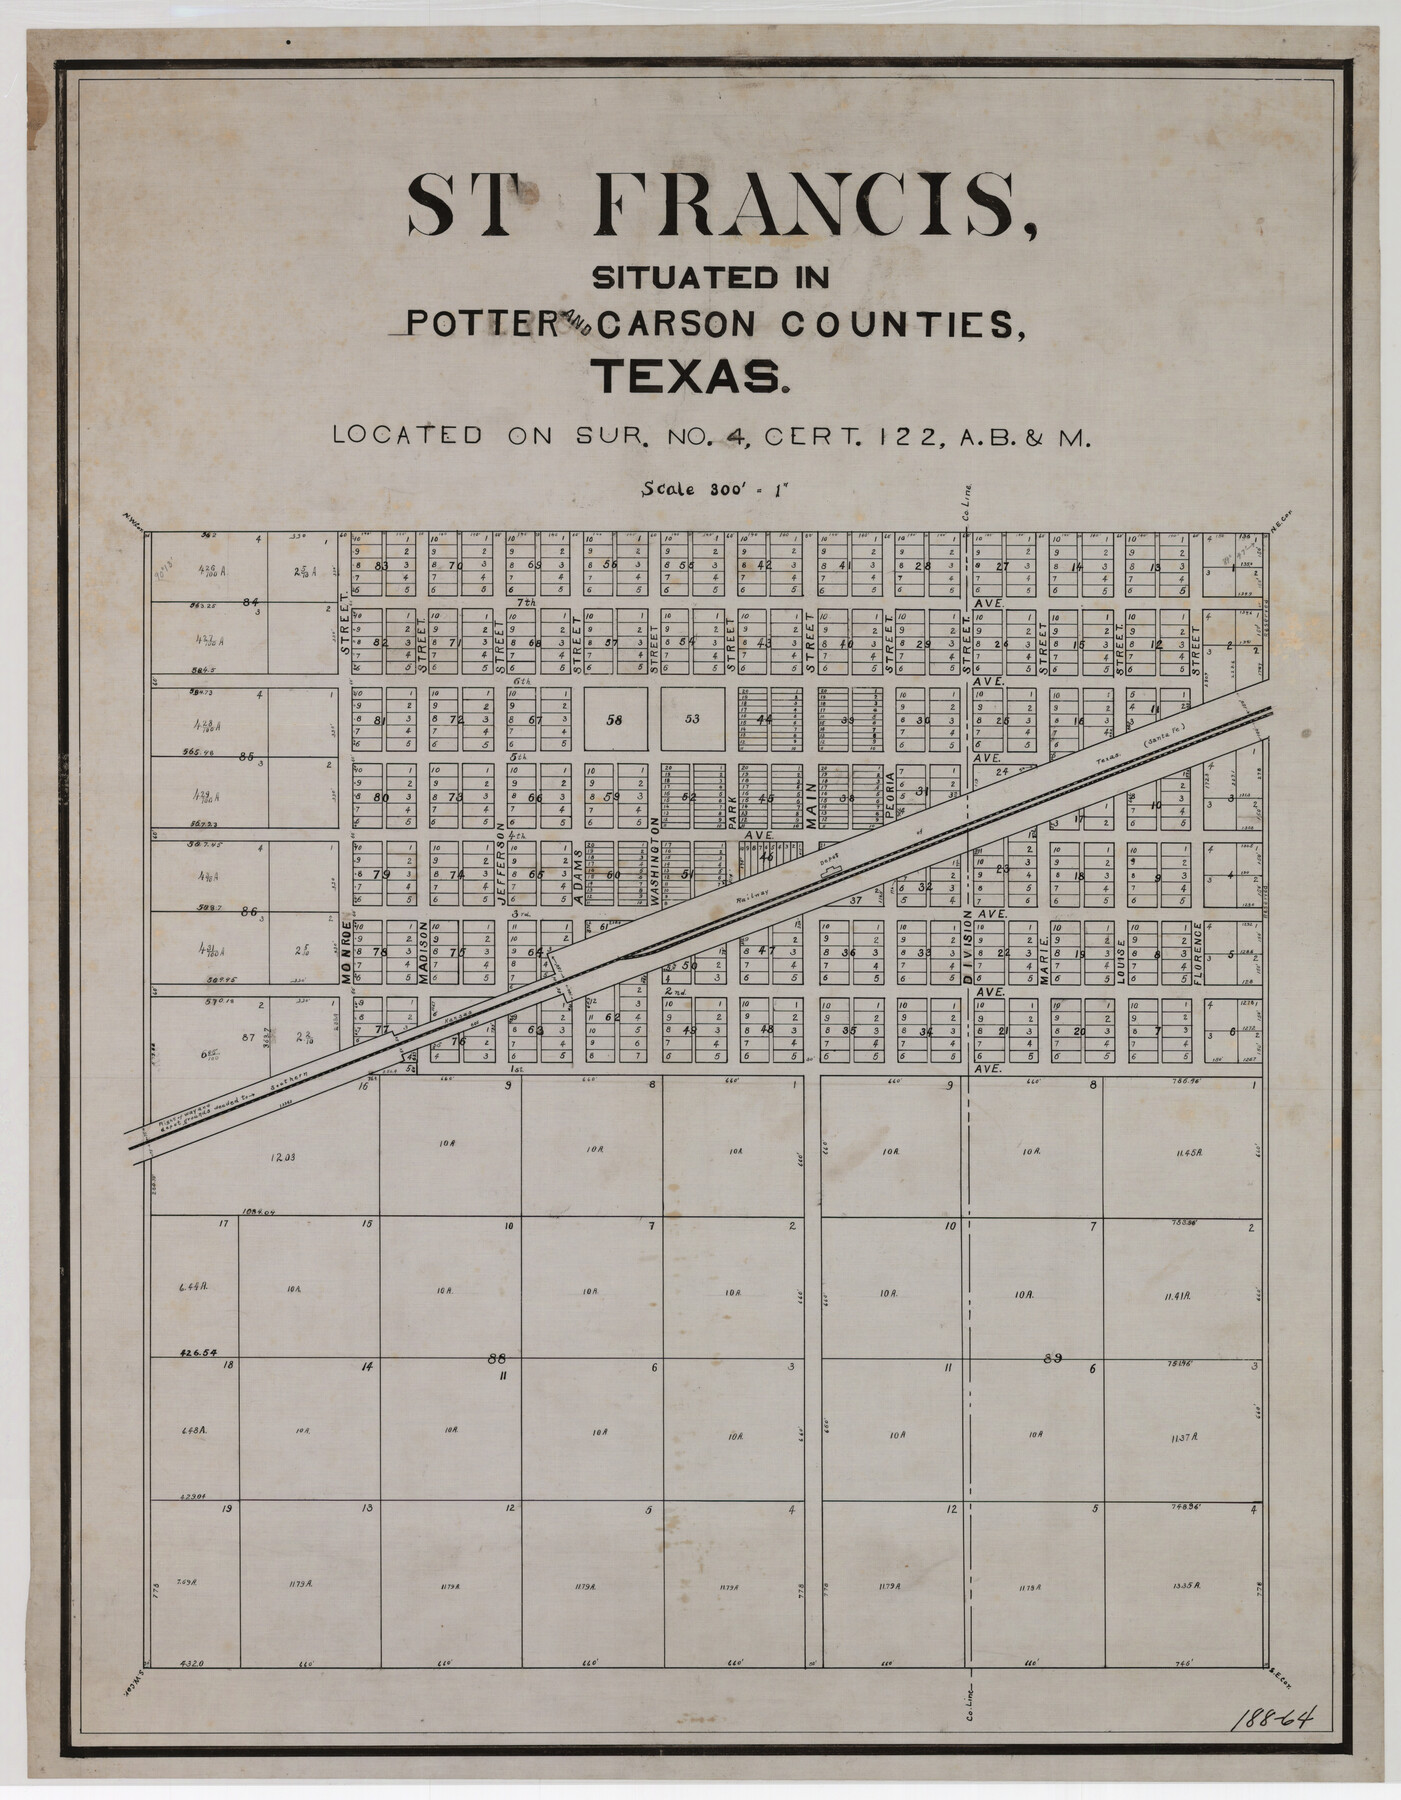 93083, St Francis situated in Potter and Carson Counties, Texas, Twichell Survey Records